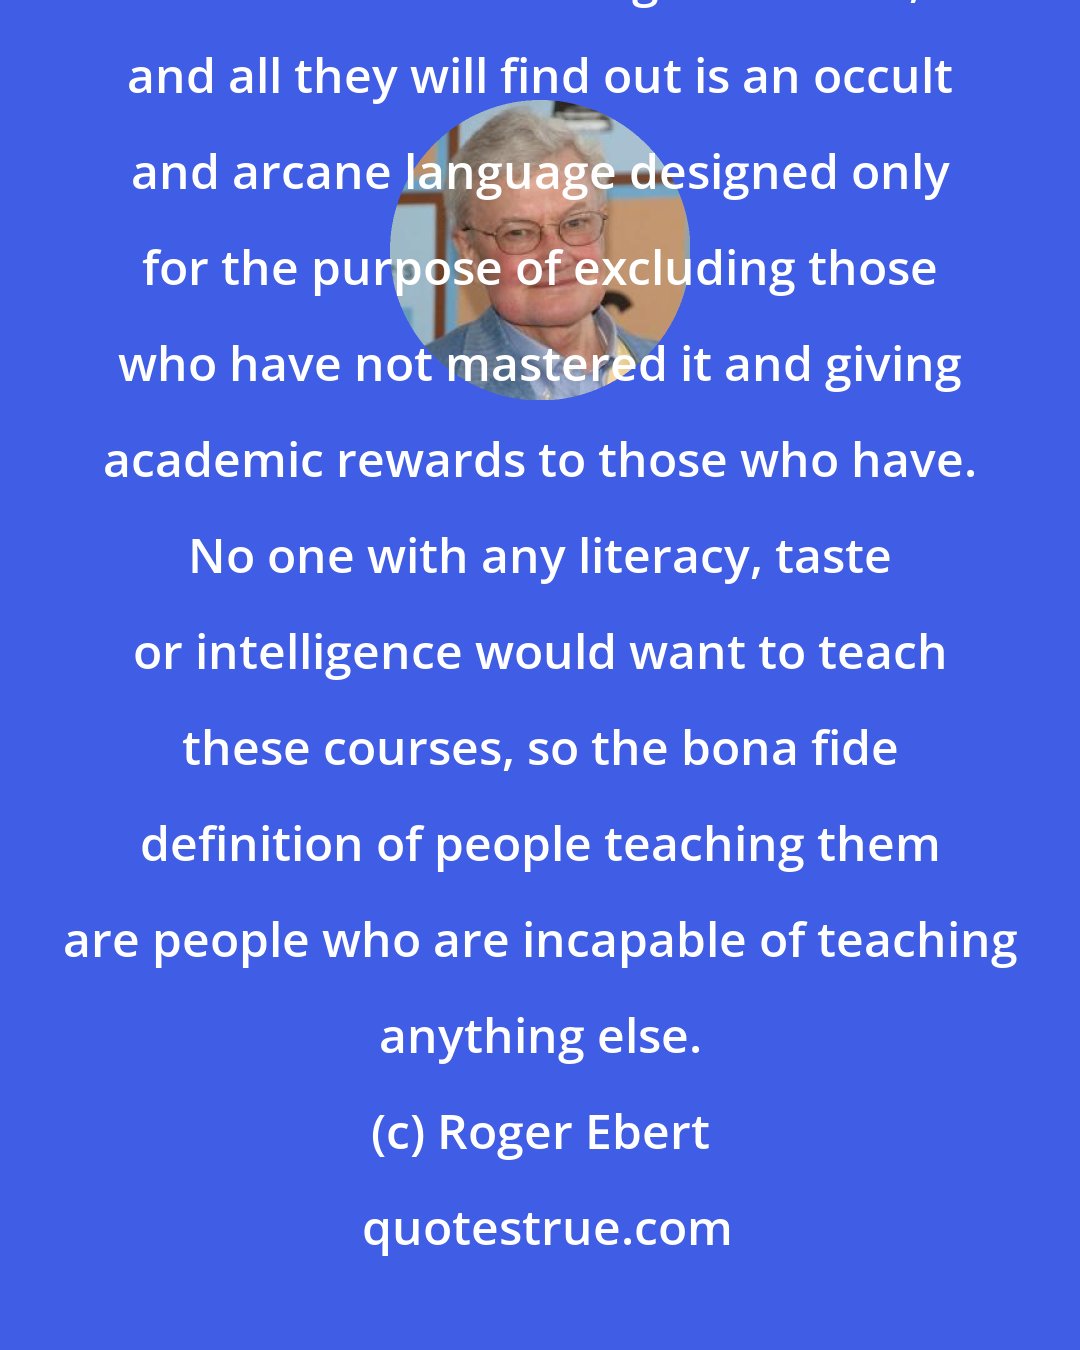 Roger Ebert: Film theory has nothing to do with film. Students presumably hope to find out something about film, and all they will find out is an occult and arcane language designed only for the purpose of excluding those who have not mastered it and giving academic rewards to those who have. No one with any literacy, taste or intelligence would want to teach these courses, so the bona fide definition of people teaching them are people who are incapable of teaching anything else.